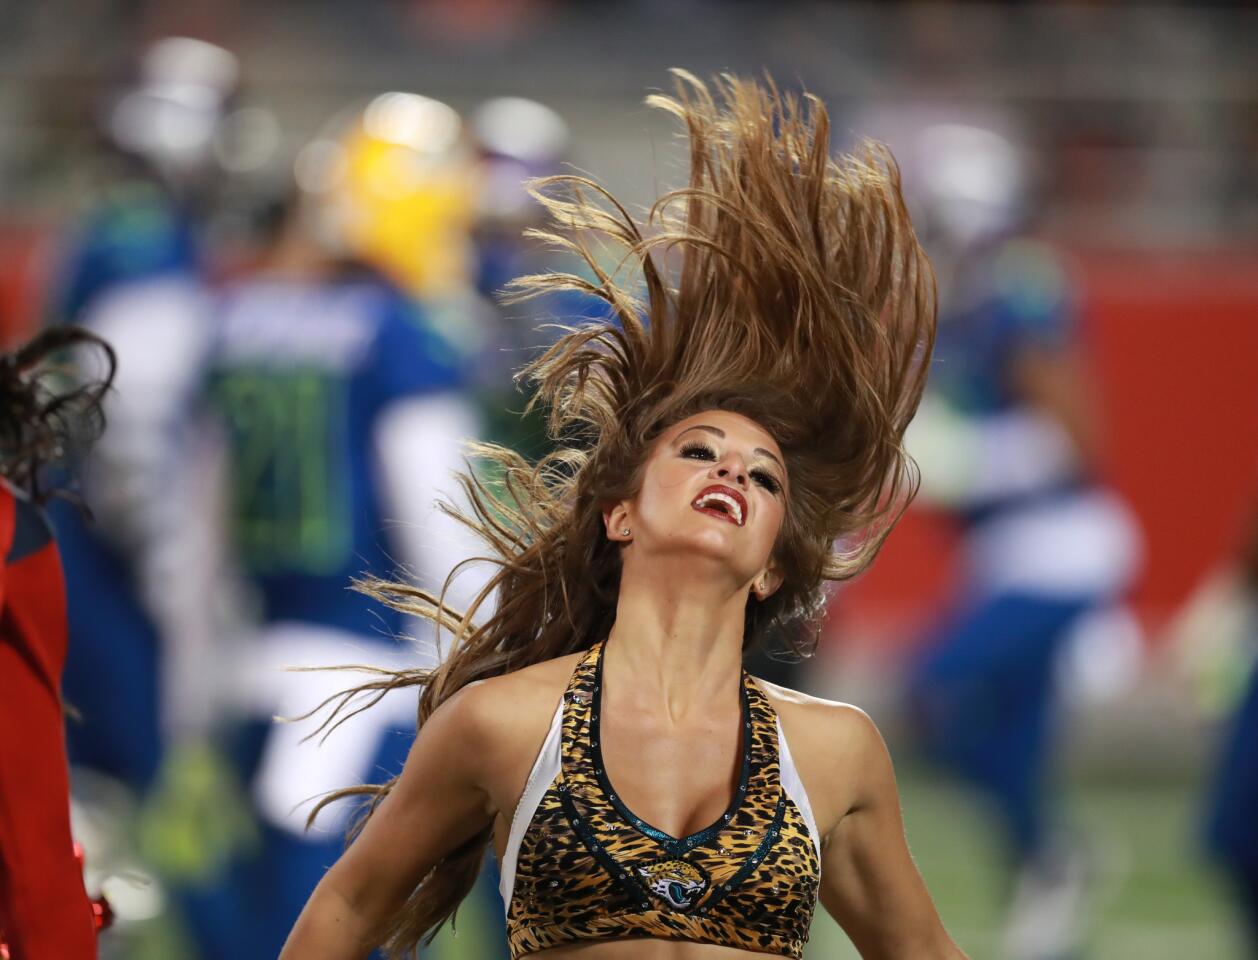 A cheerleader performs during the NFL Pro Bowl football game Sunday, Jan. 29, 2017, in Orlando, Fla. (Jeff Haynes/AP Images for Panini)